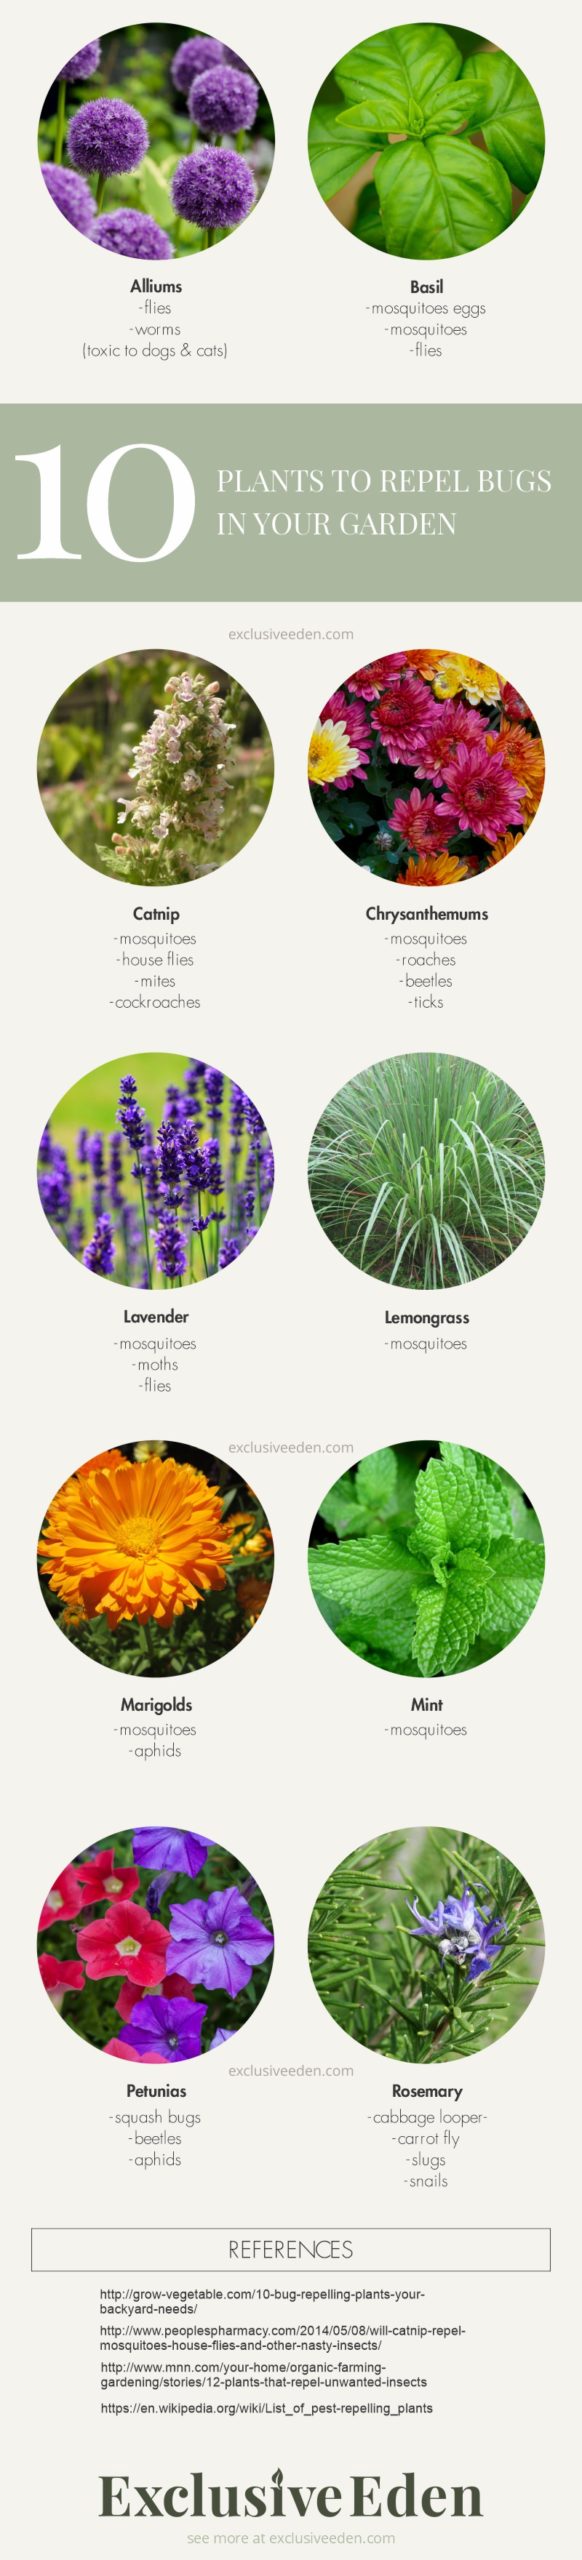 Plant guide infographic for which plants help repel bugs.